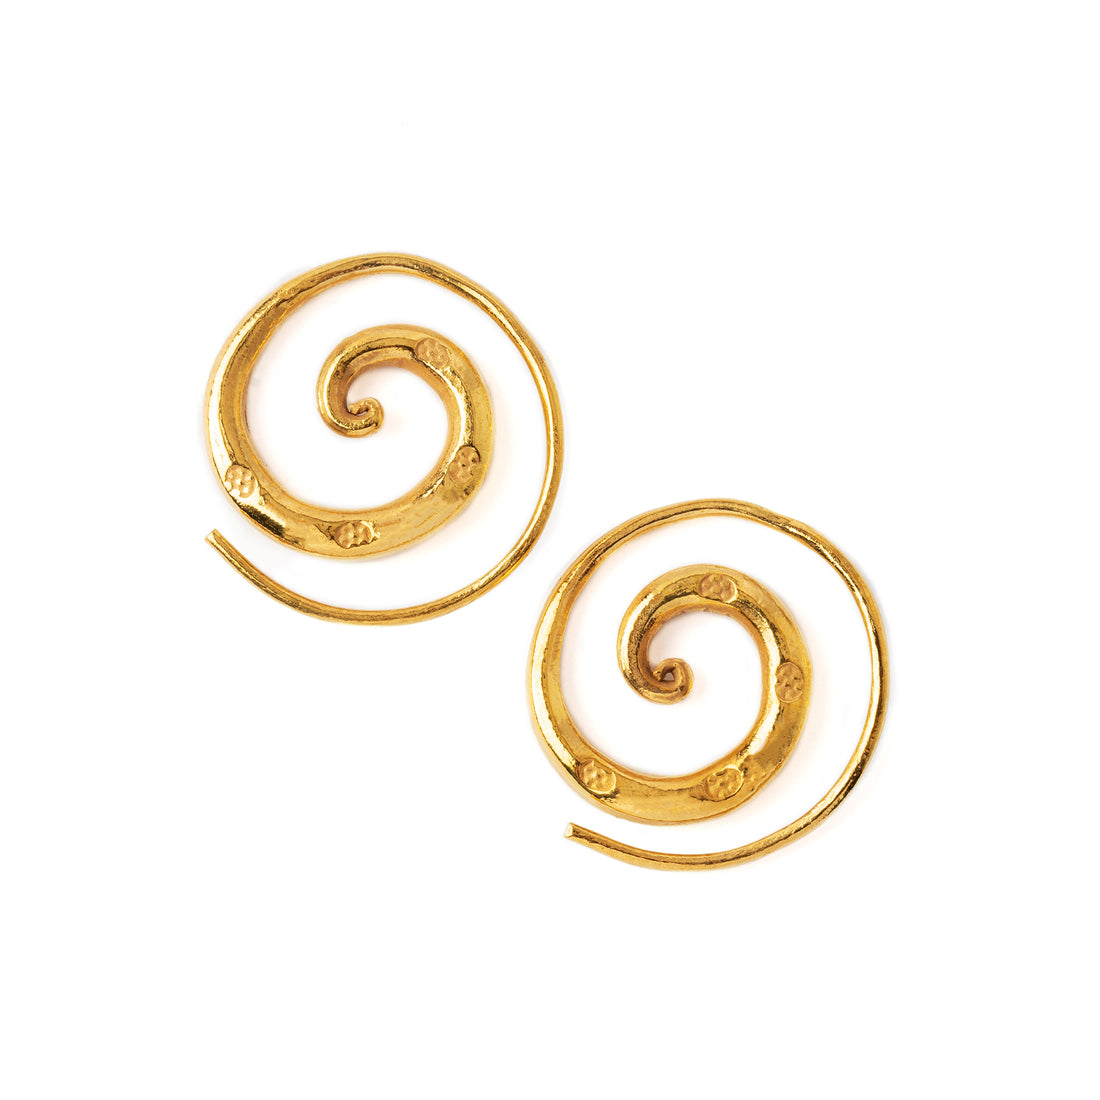 Stamped Gold Spiral Earrings frontal view